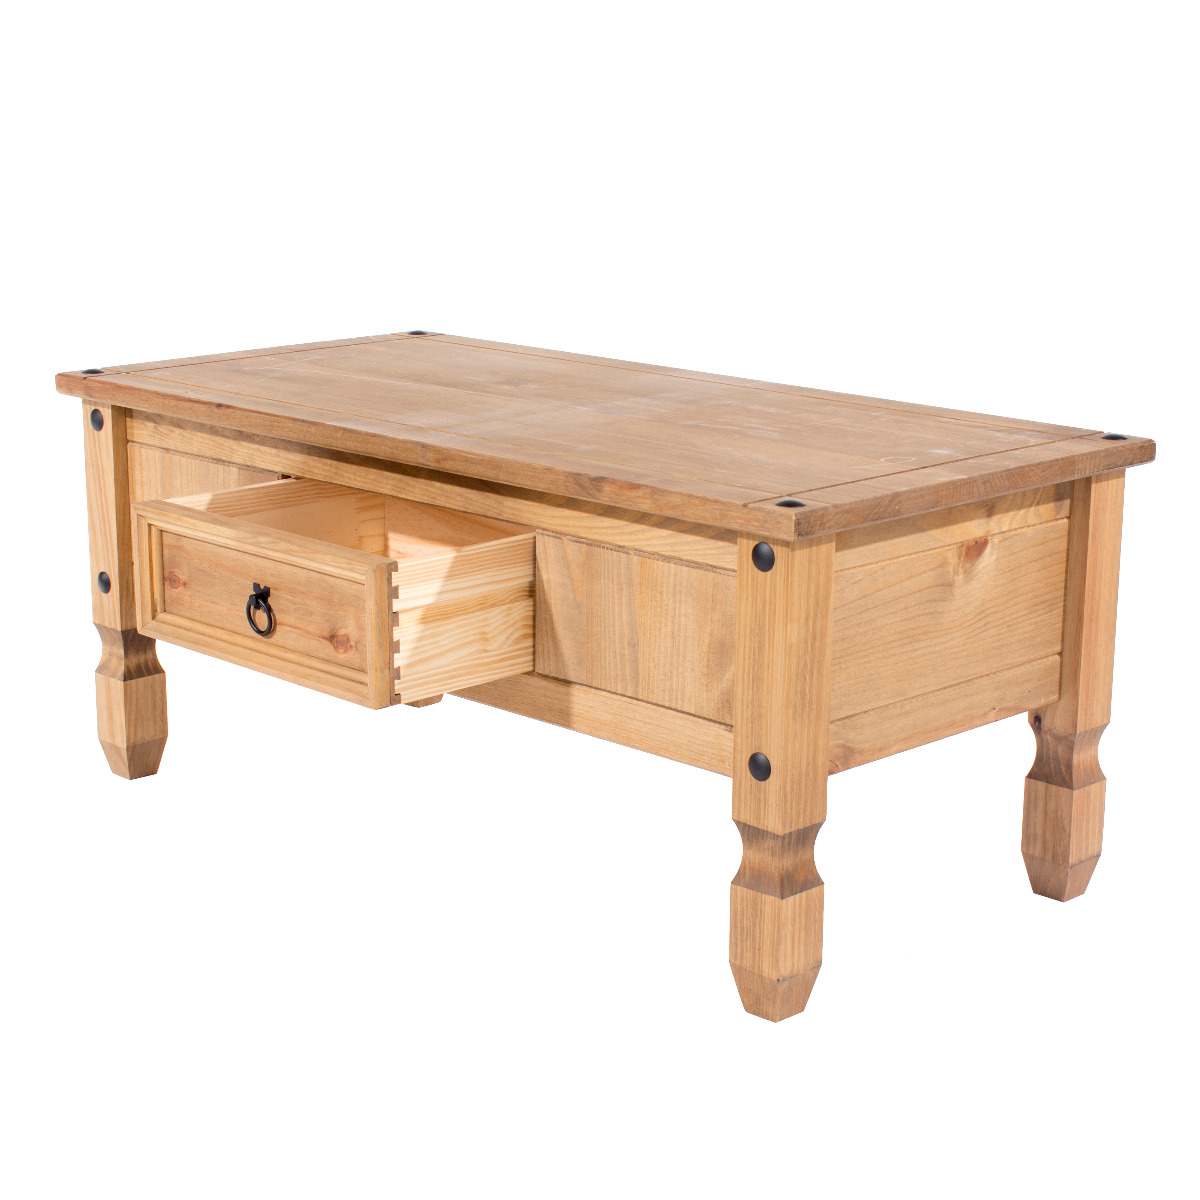 Farmhouse Antique Solid Pine Wood Coffee Table Timber Furniture